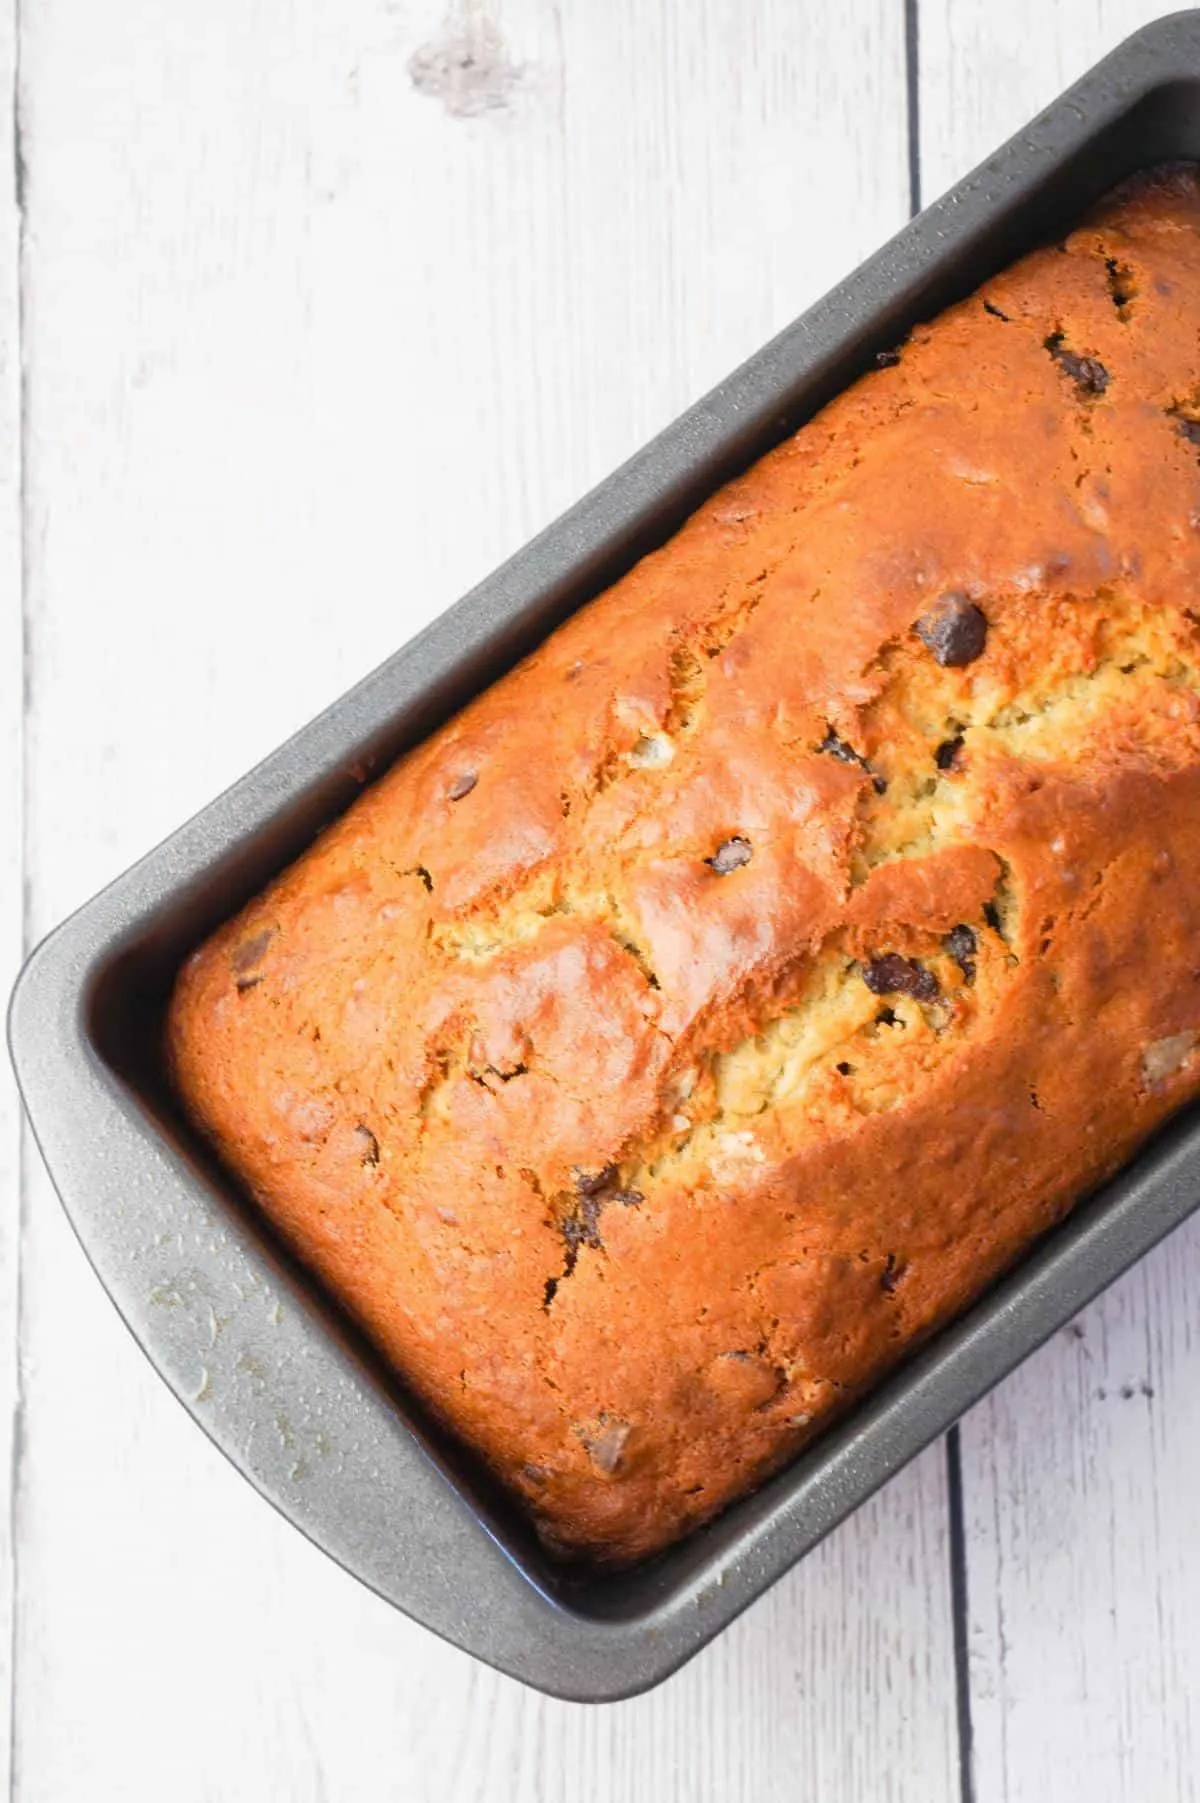 Chocolate Chip Banana Bread is a tasty treat made with ripe bananas and loaded with semi-sweet chocolate chips.